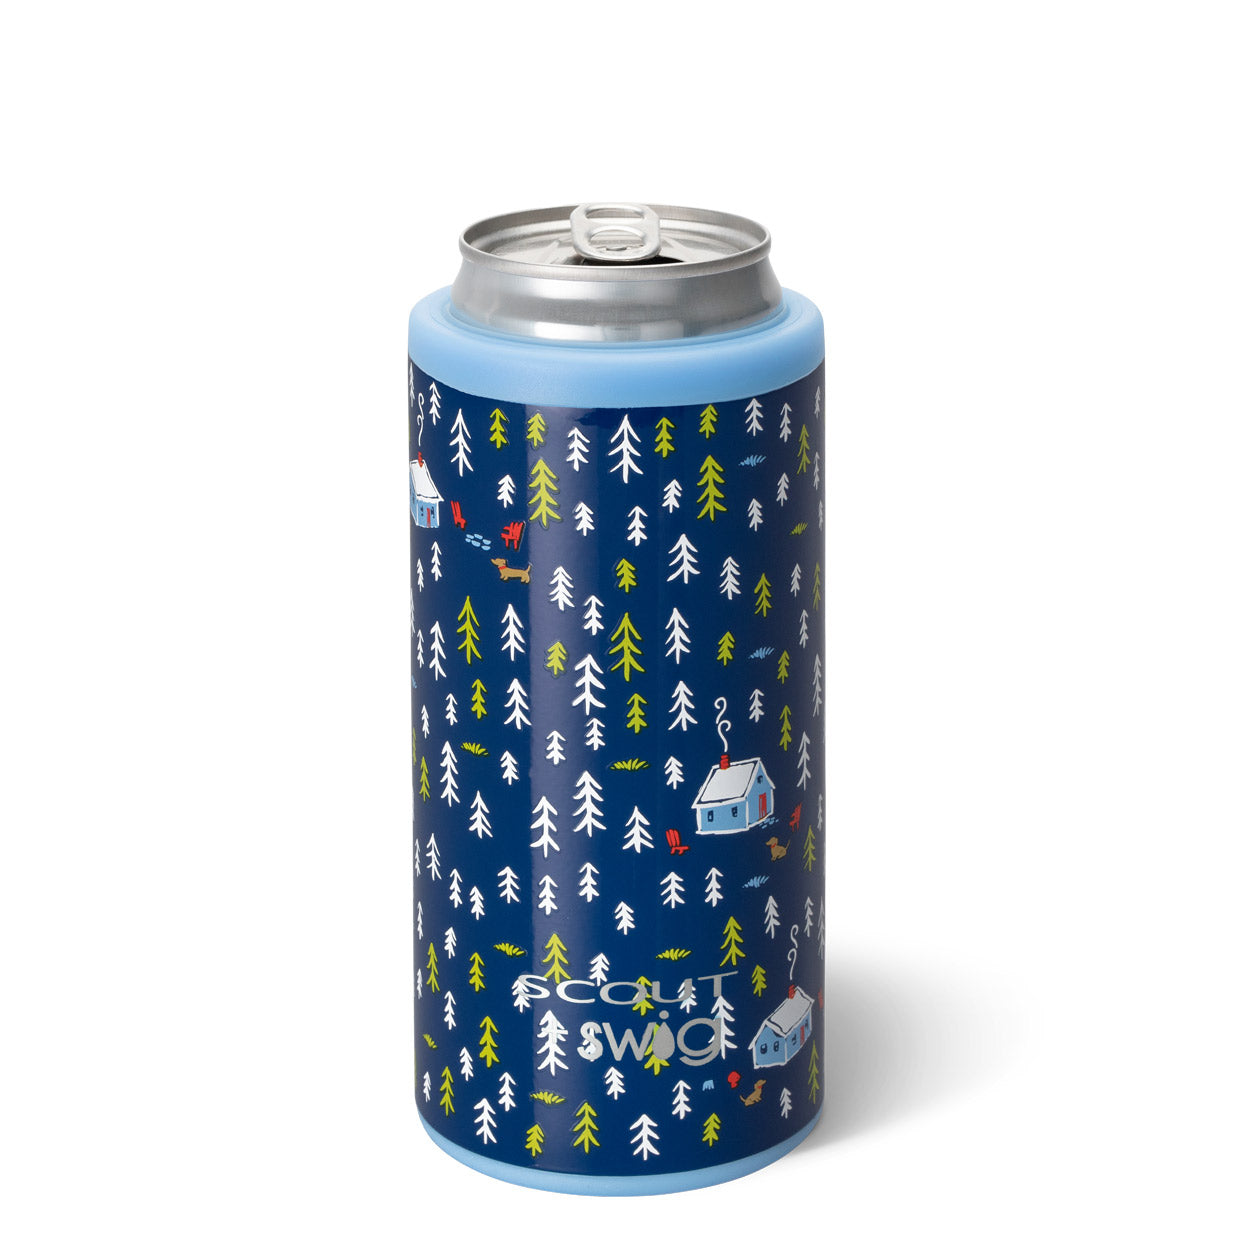 SCOUT + Swig Life 12oz Skinny Can Cooler